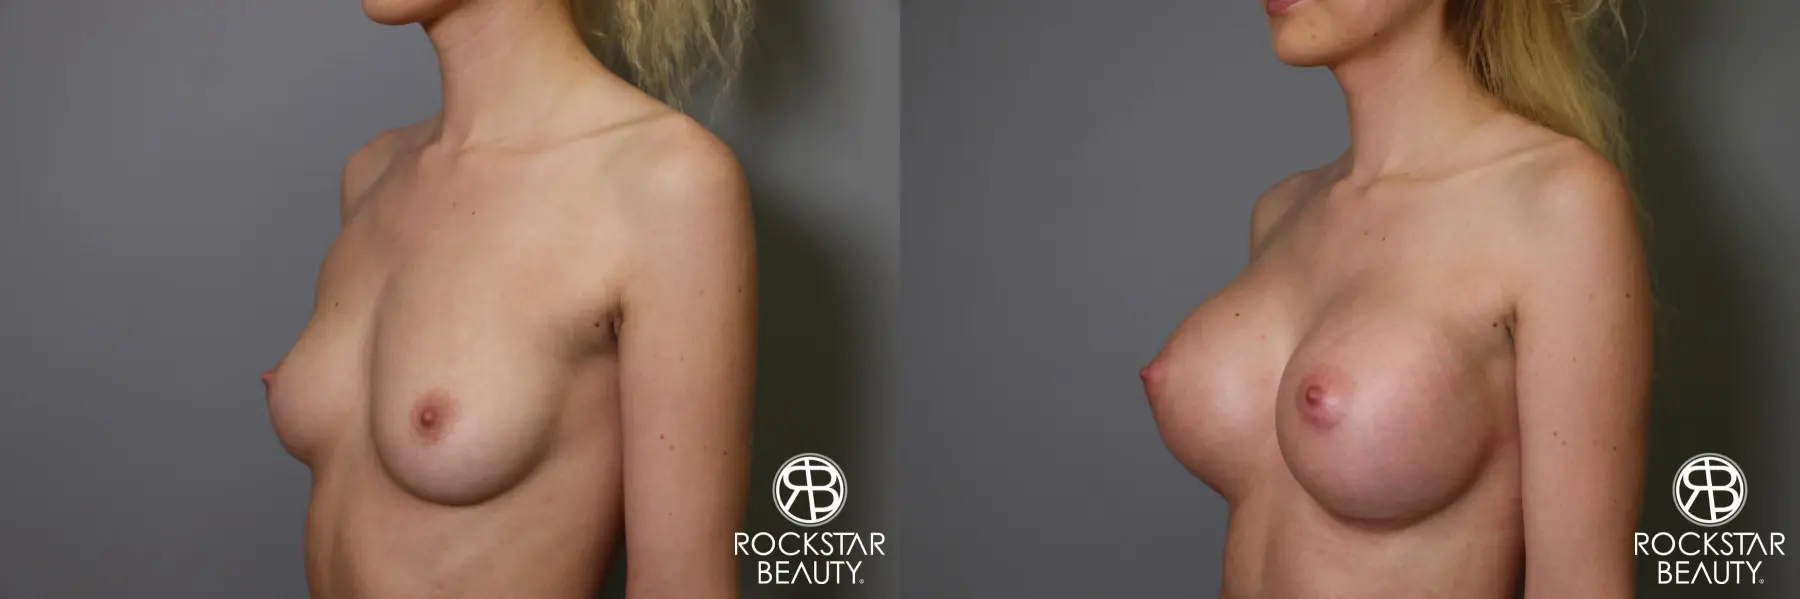 Breast Augmentation: Patient 1 - Before and After 4